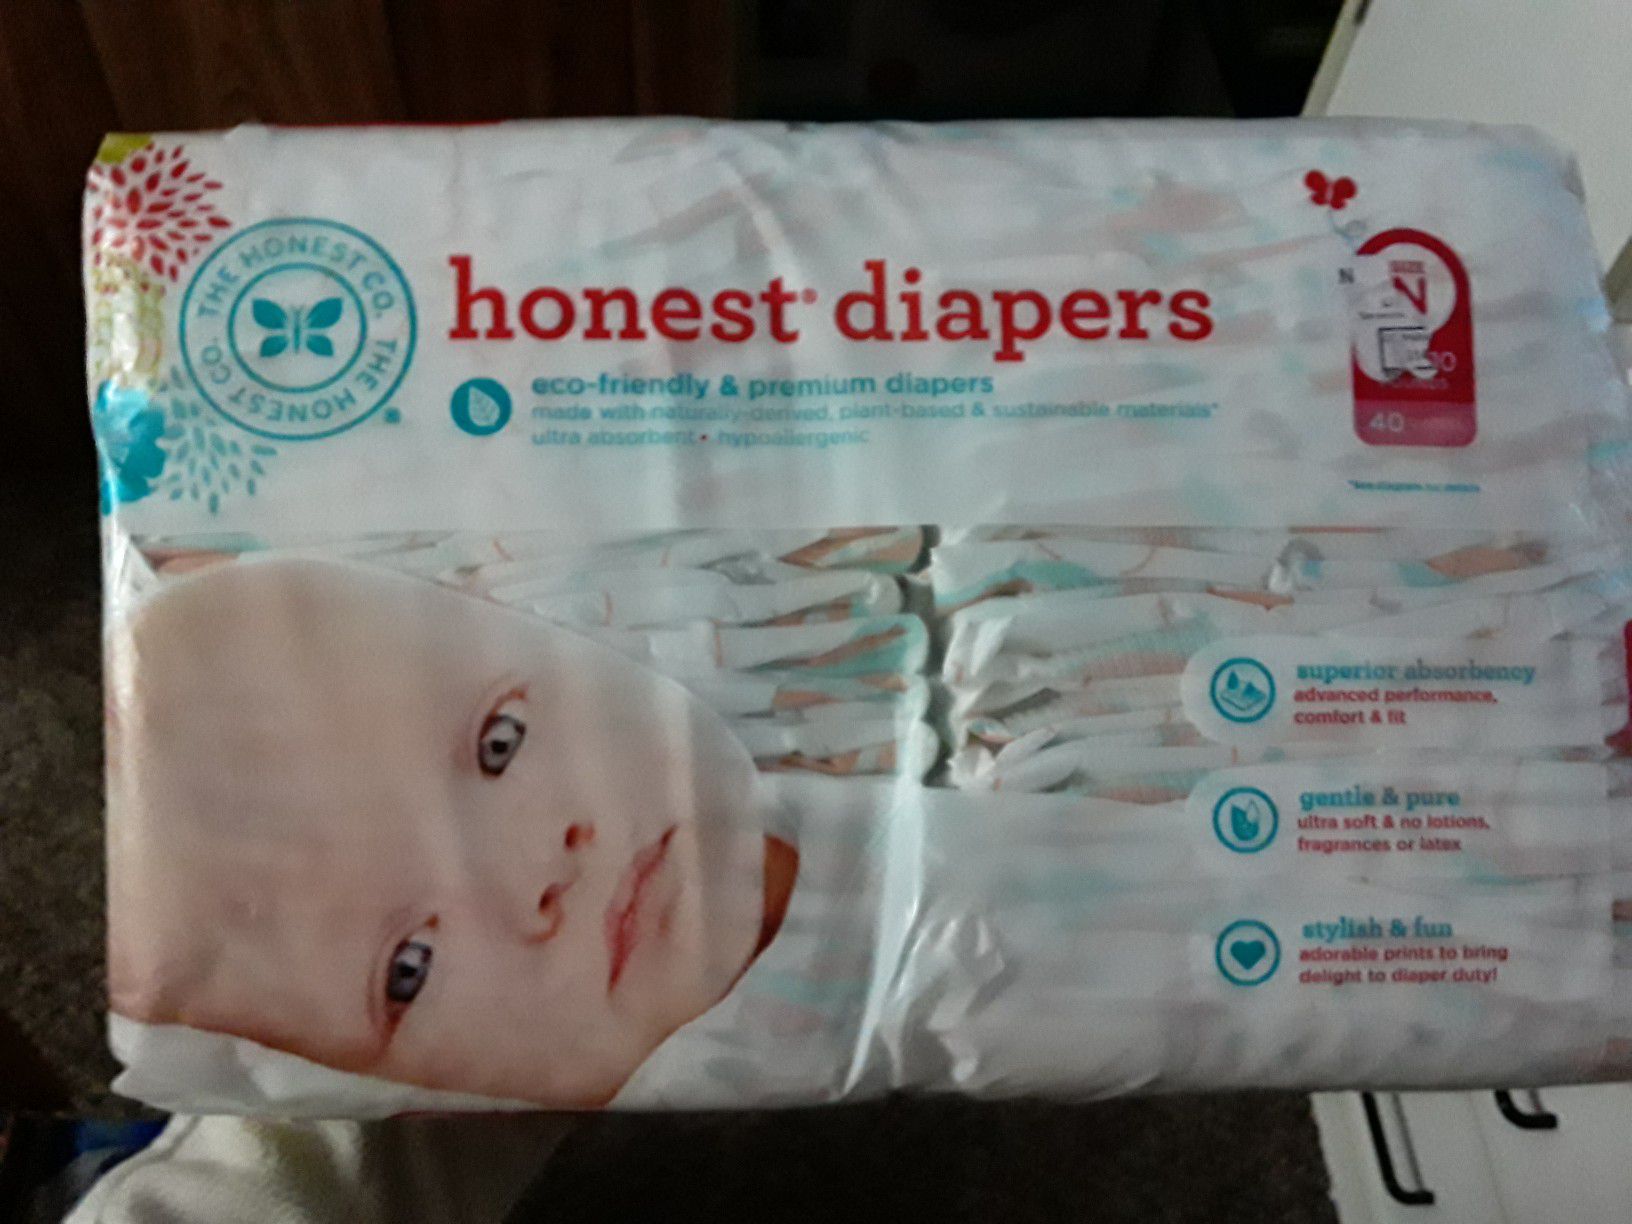 Honest diapers size N 1 pack